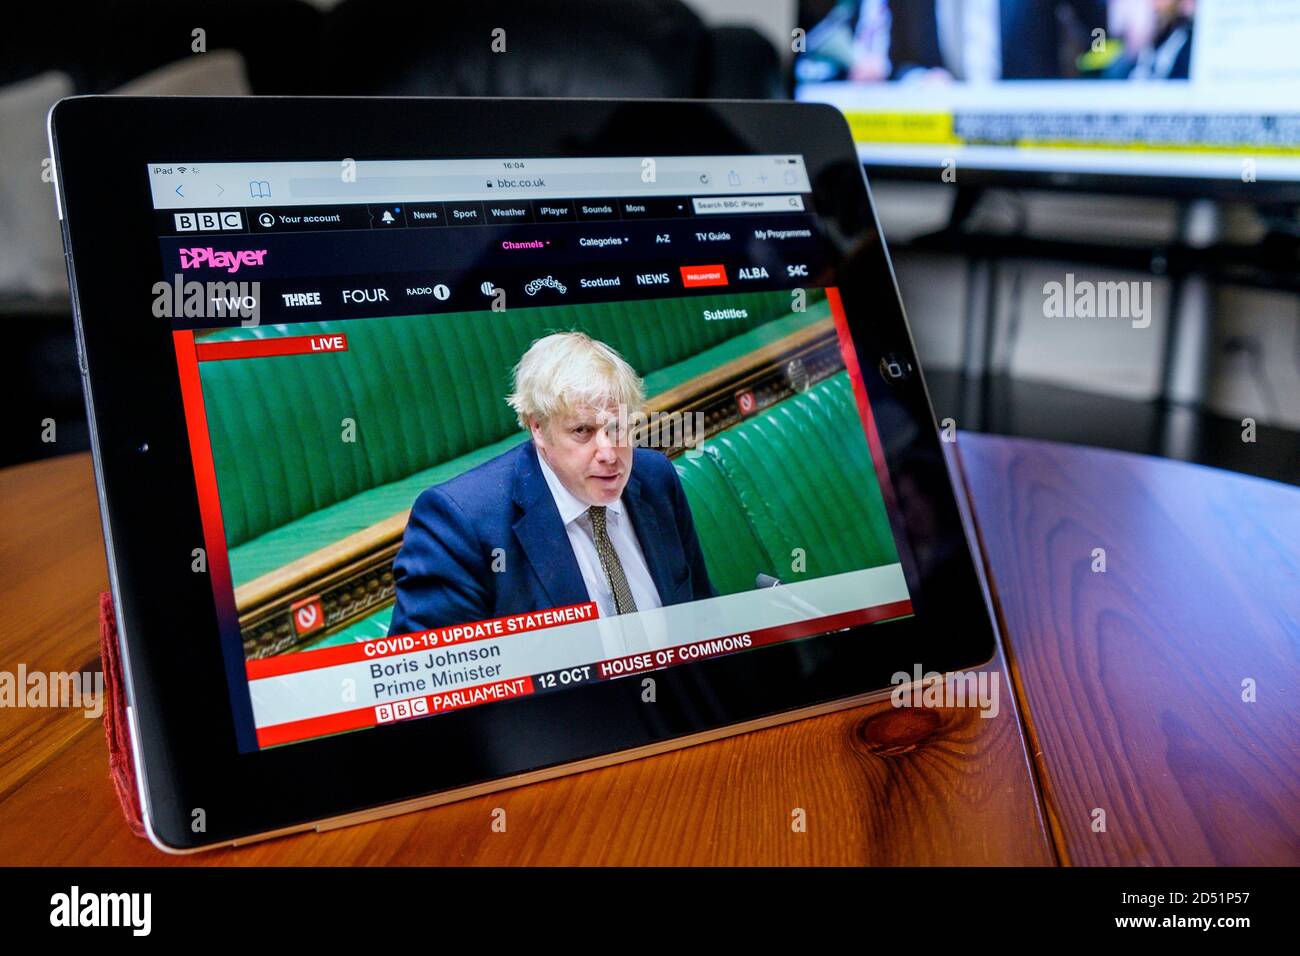 Chippenham, Wiltshire, UK. 12th October, 2020. The UK Prime minister's announcement in Parliament to inform MP's of the introduction of a COVID-19 ‘three-tier’ system for England is watched on an Ipad in Chippenham, Wiltshire. Credit: Lynchpics/Alamy Live News Stock Photo